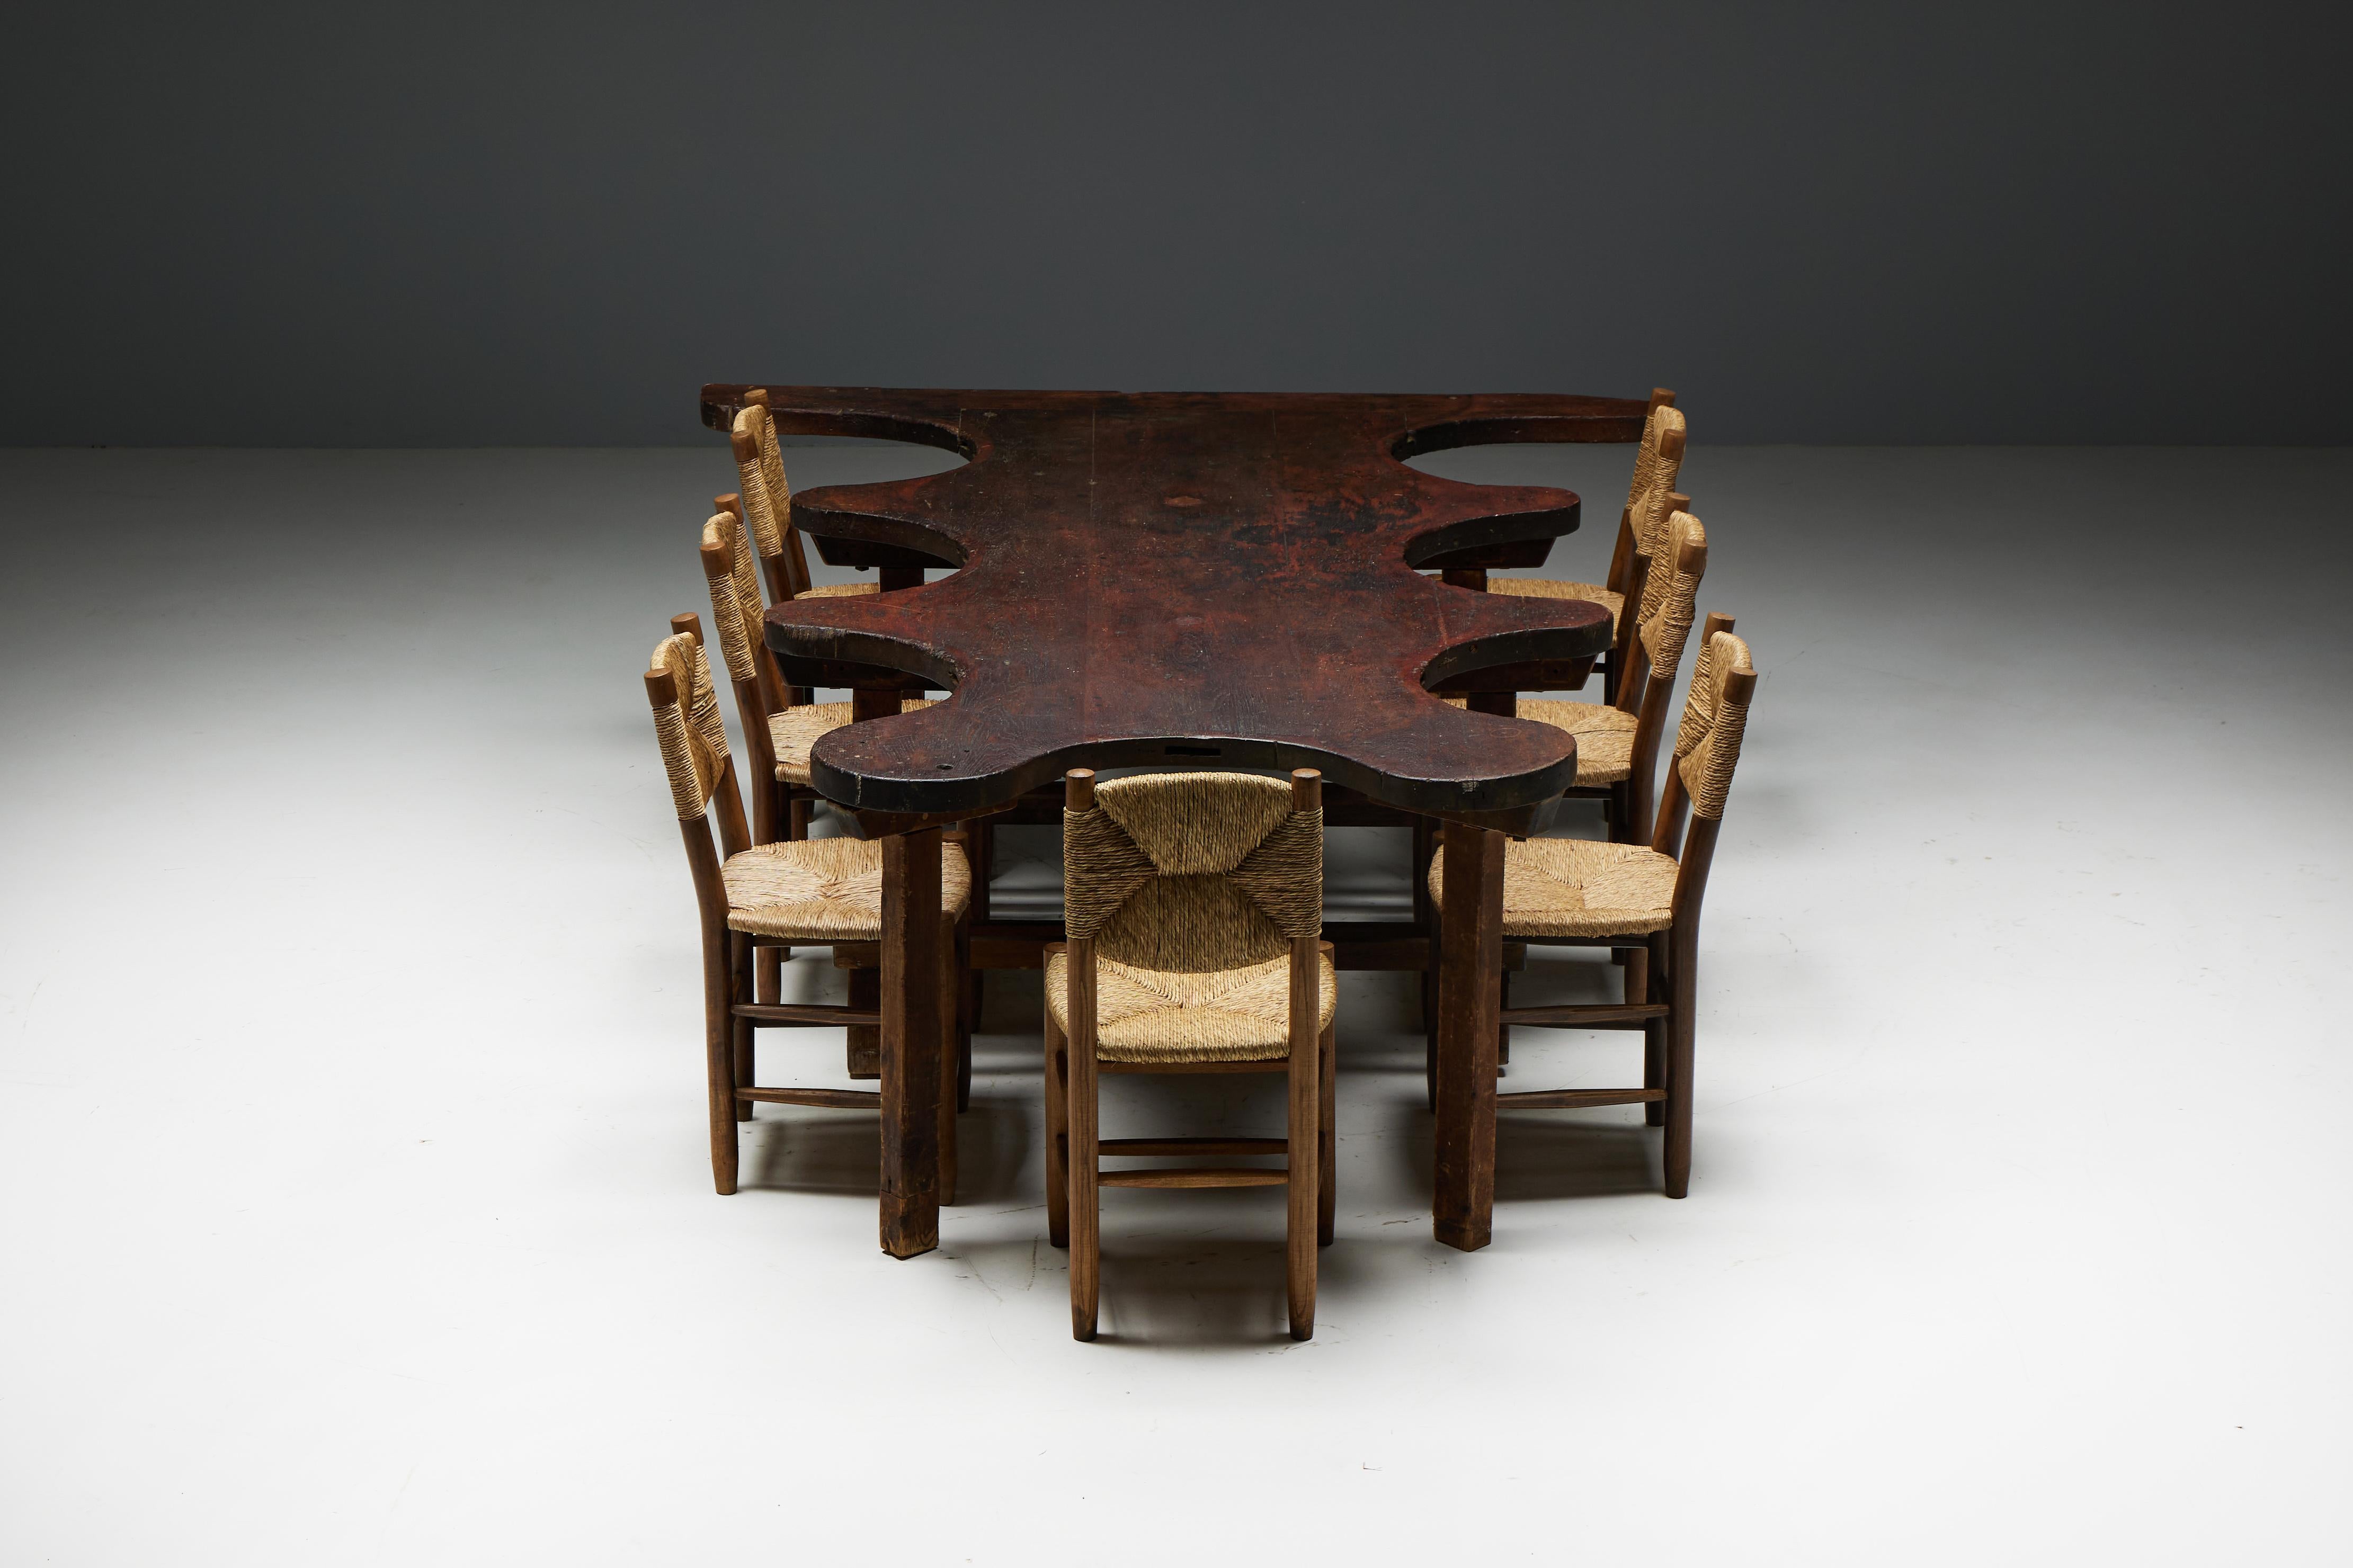 Rustic Free Form Organic Table, France, Late 19th Century For Sale 10